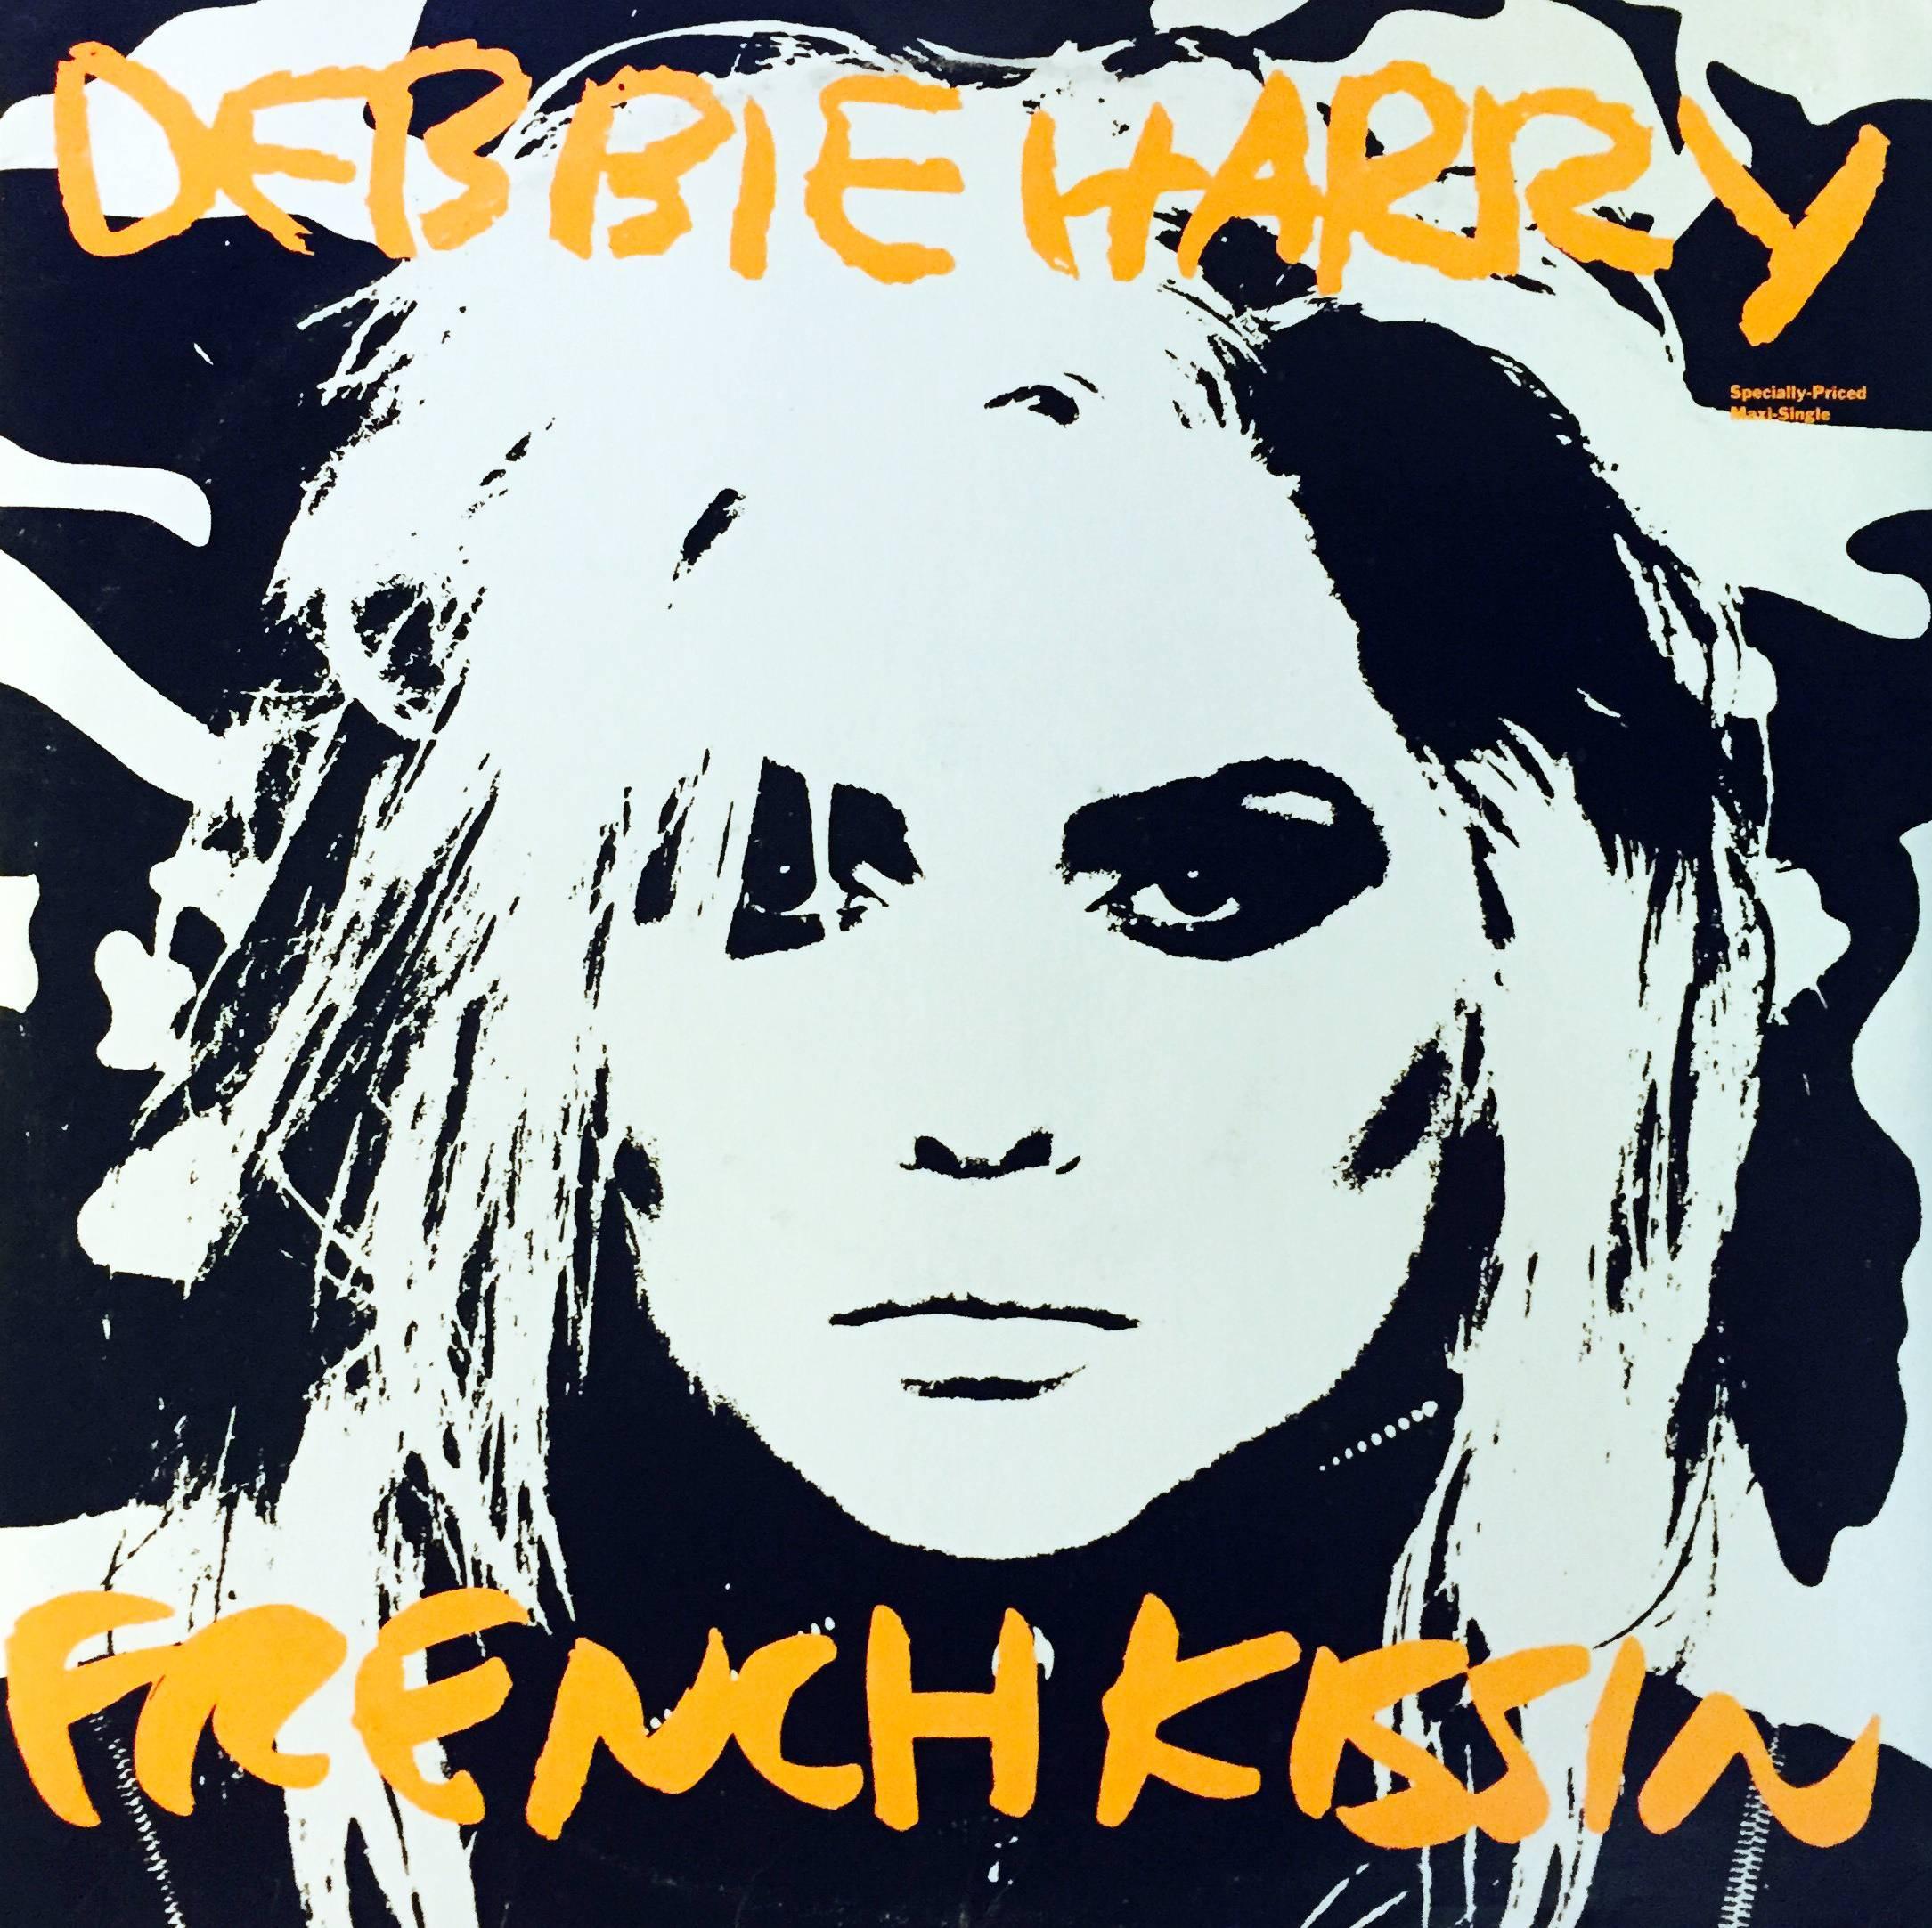 1986 1st pressing, Debbie, Harry, "French Kissin" Vinyl Album featuring Original Cover Art by Andy Warhol. 

12 x 12 Inches (30.48 x 30.48 cm)
Very good condition
*Includes original record in excellent condition
See lower right section of reverse